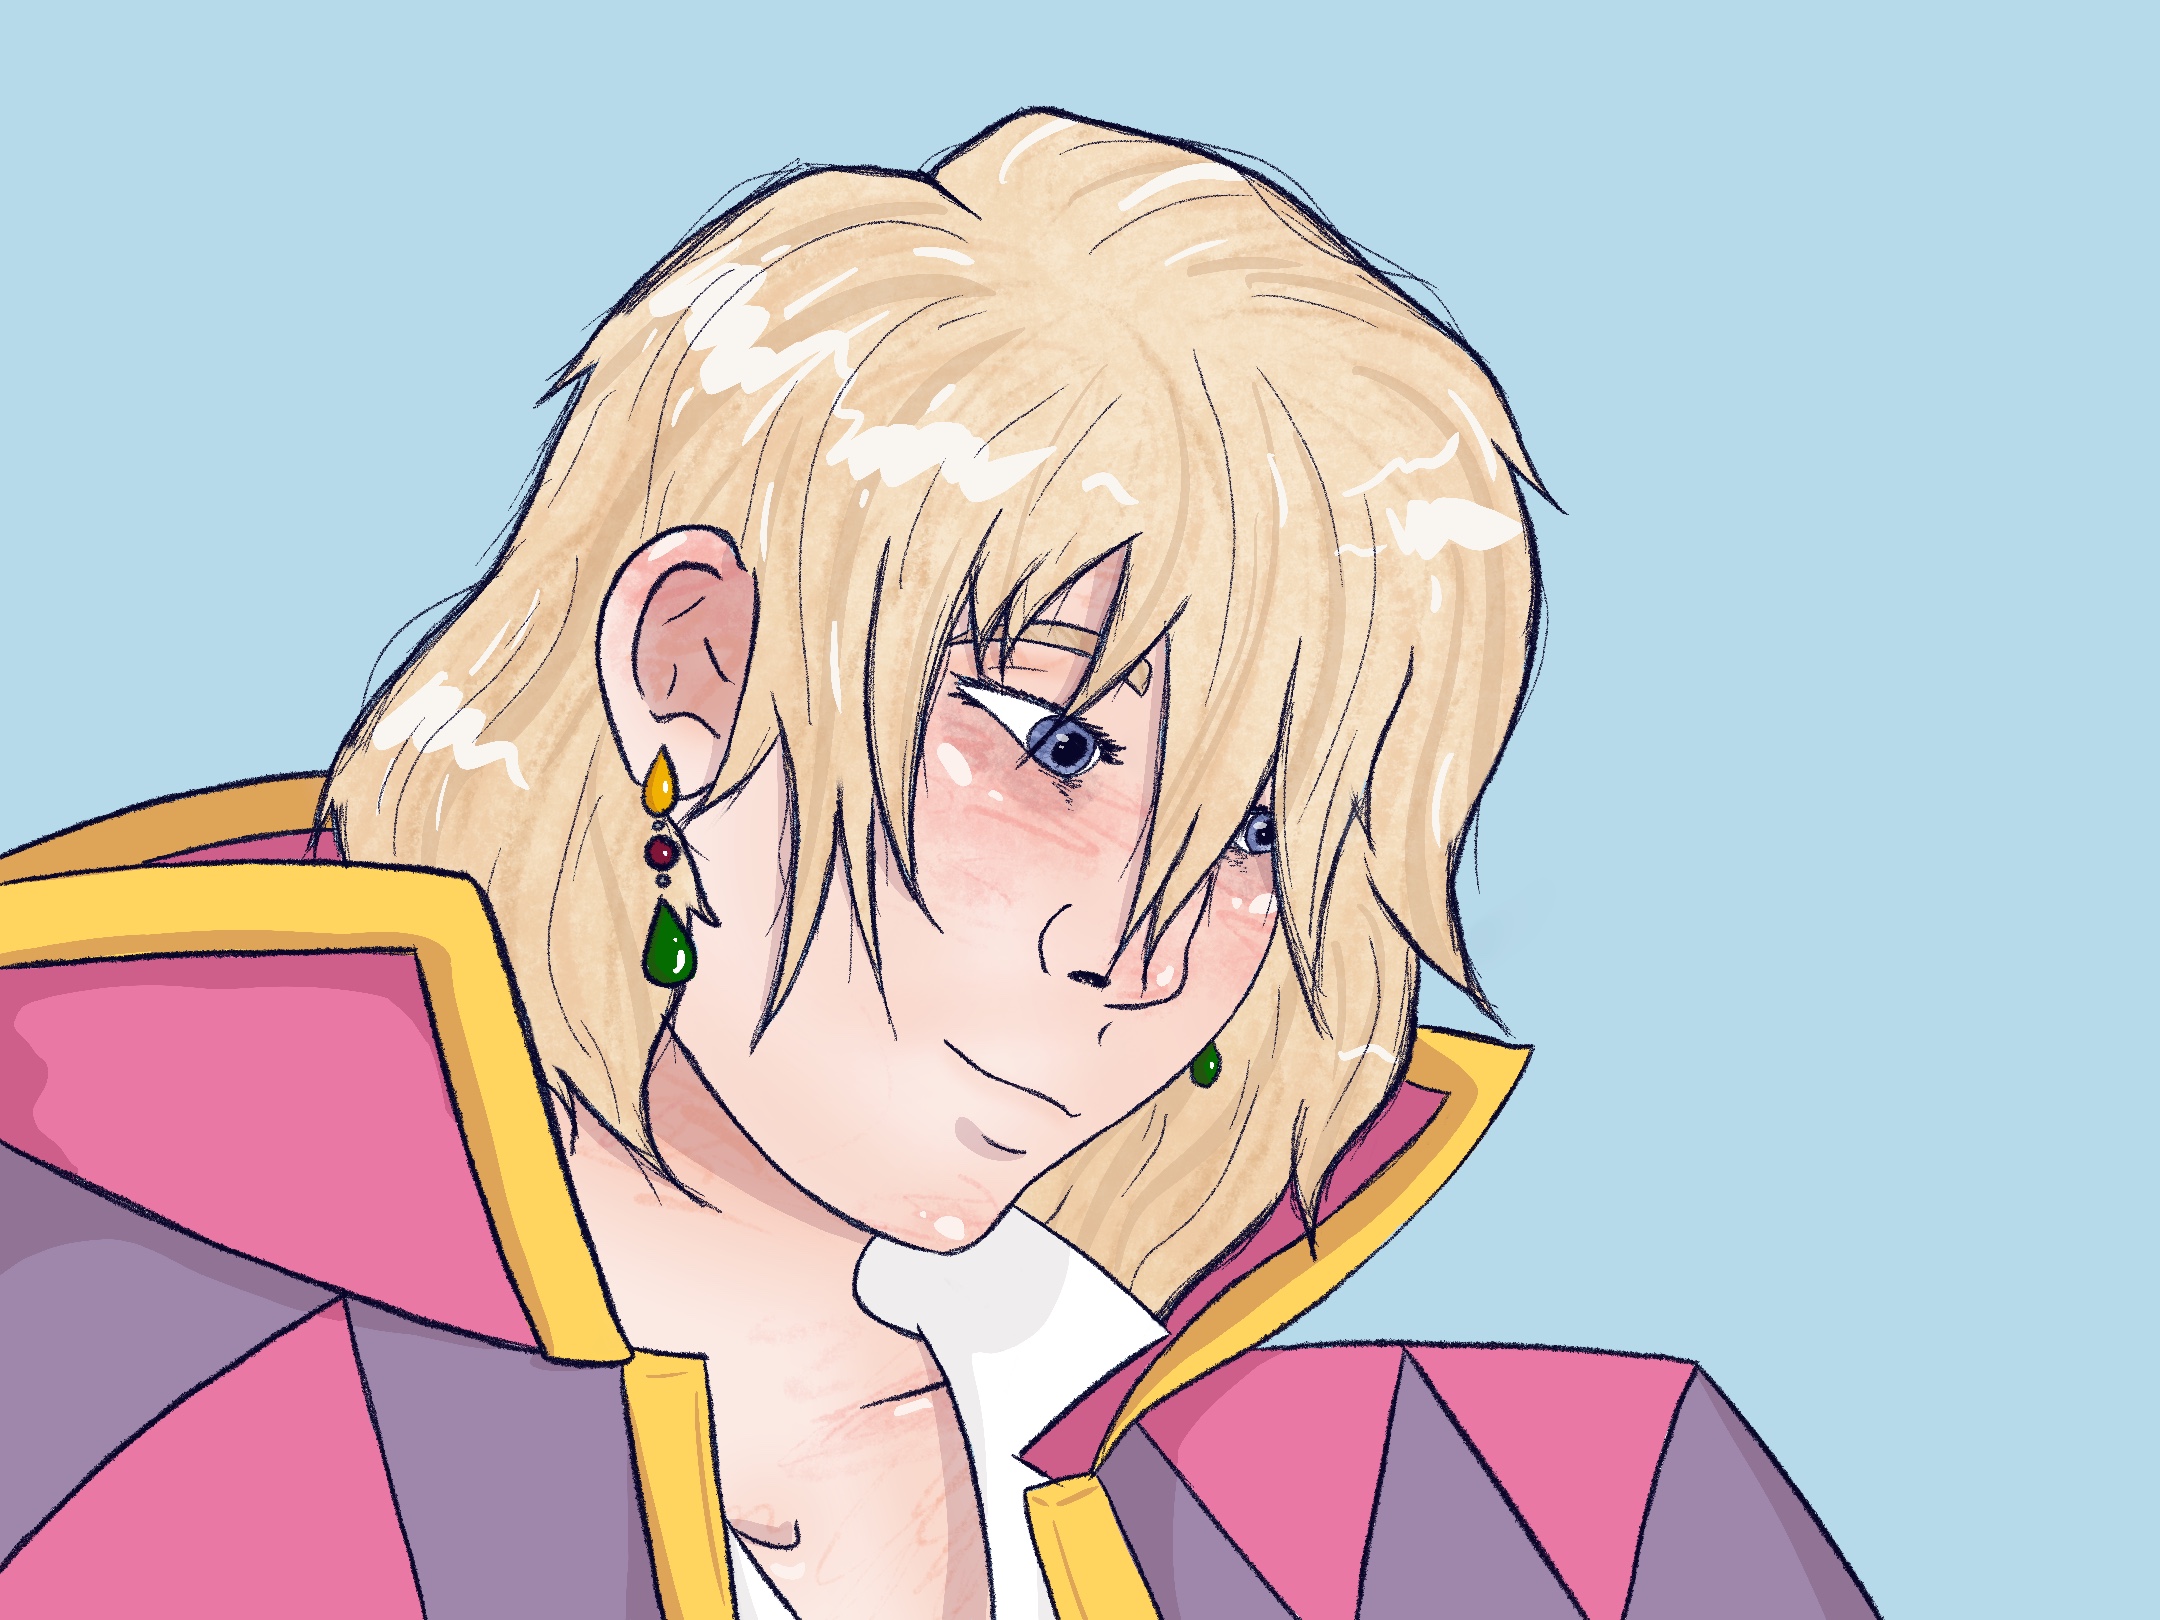 howl from howl's moving castle, from a 3/4 perspective